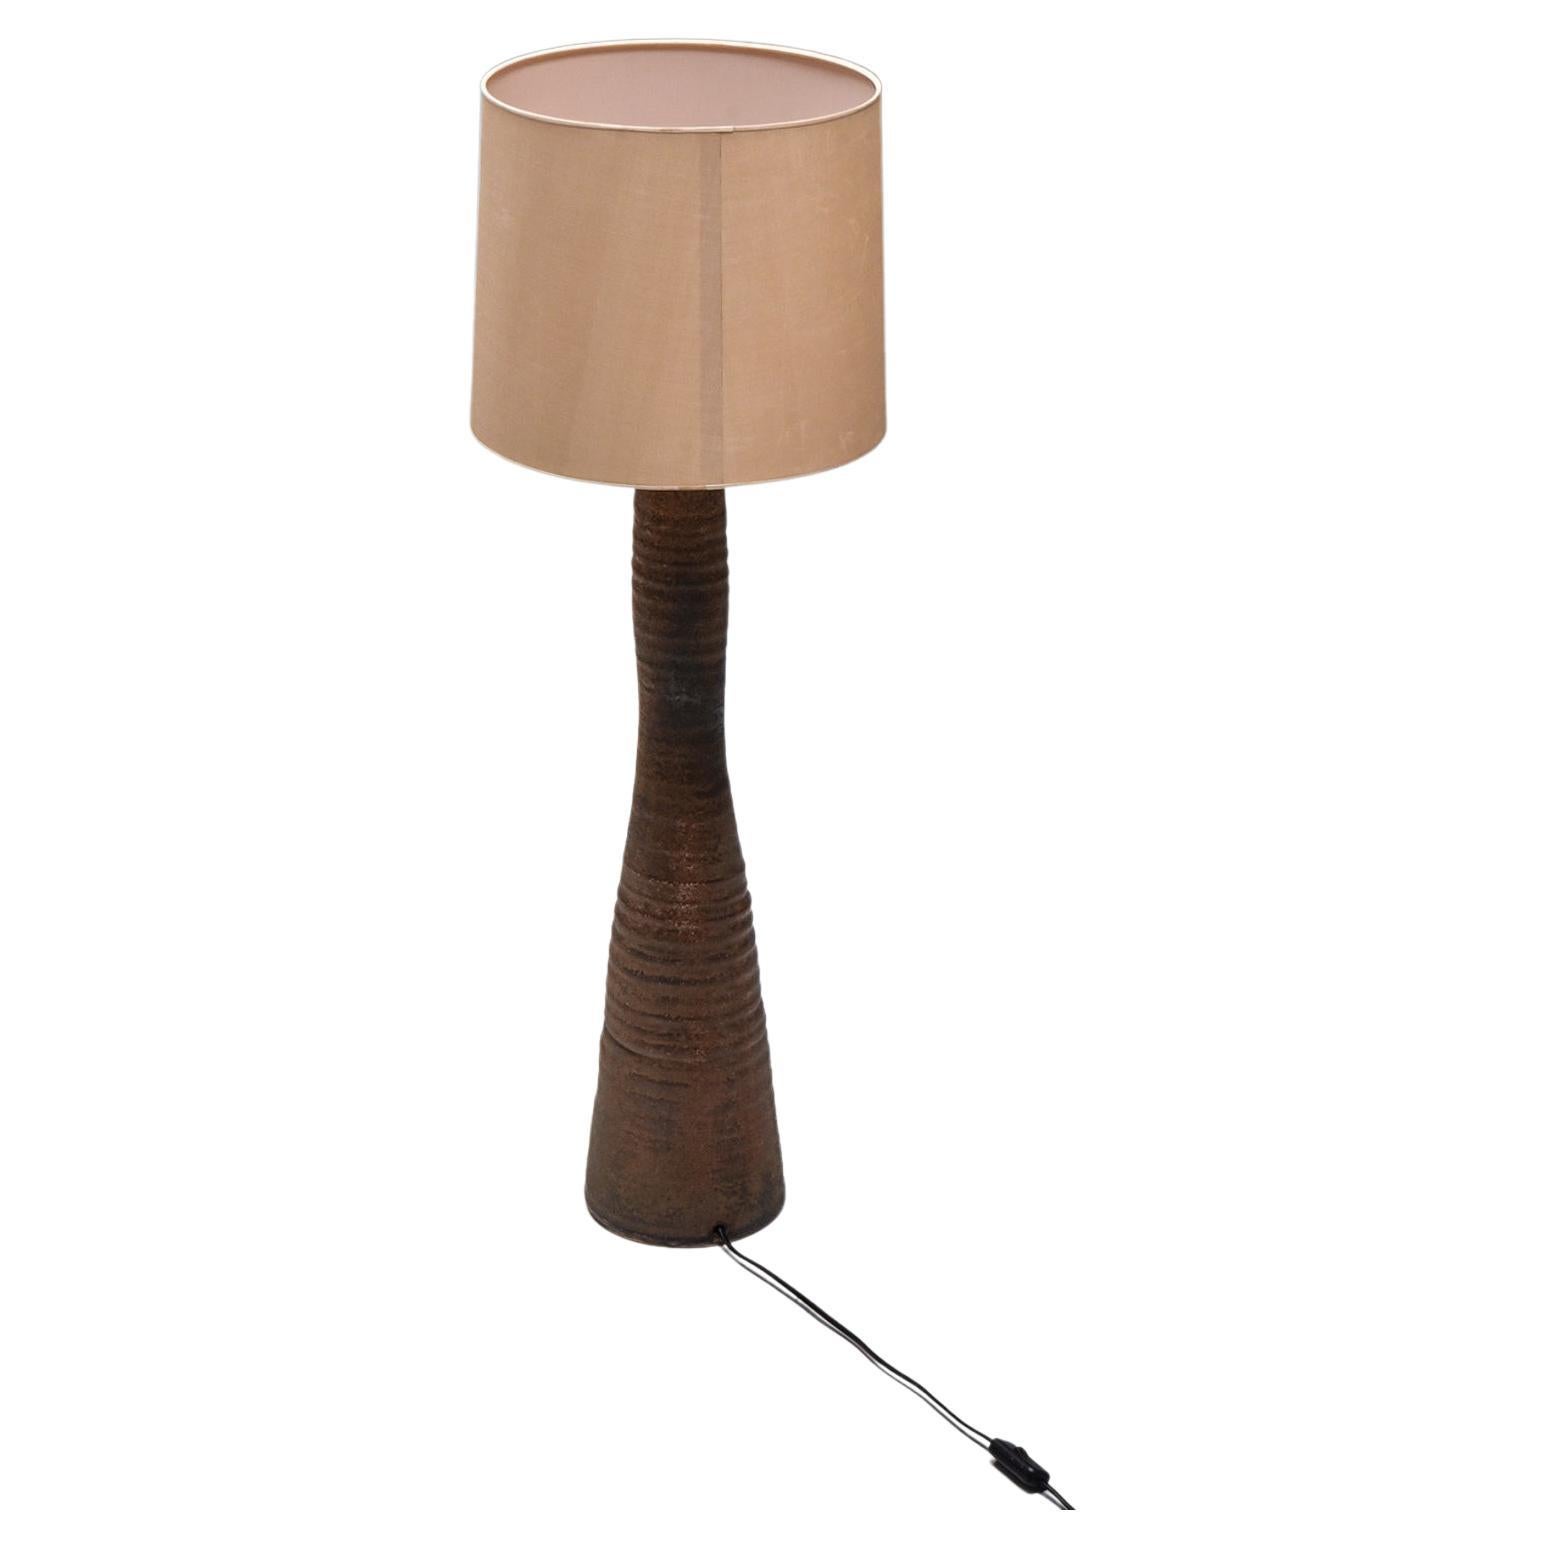 Rustic Floor Lamp with Ceramic Base, Mid-Century Modern, Organic, 1940's For Sale